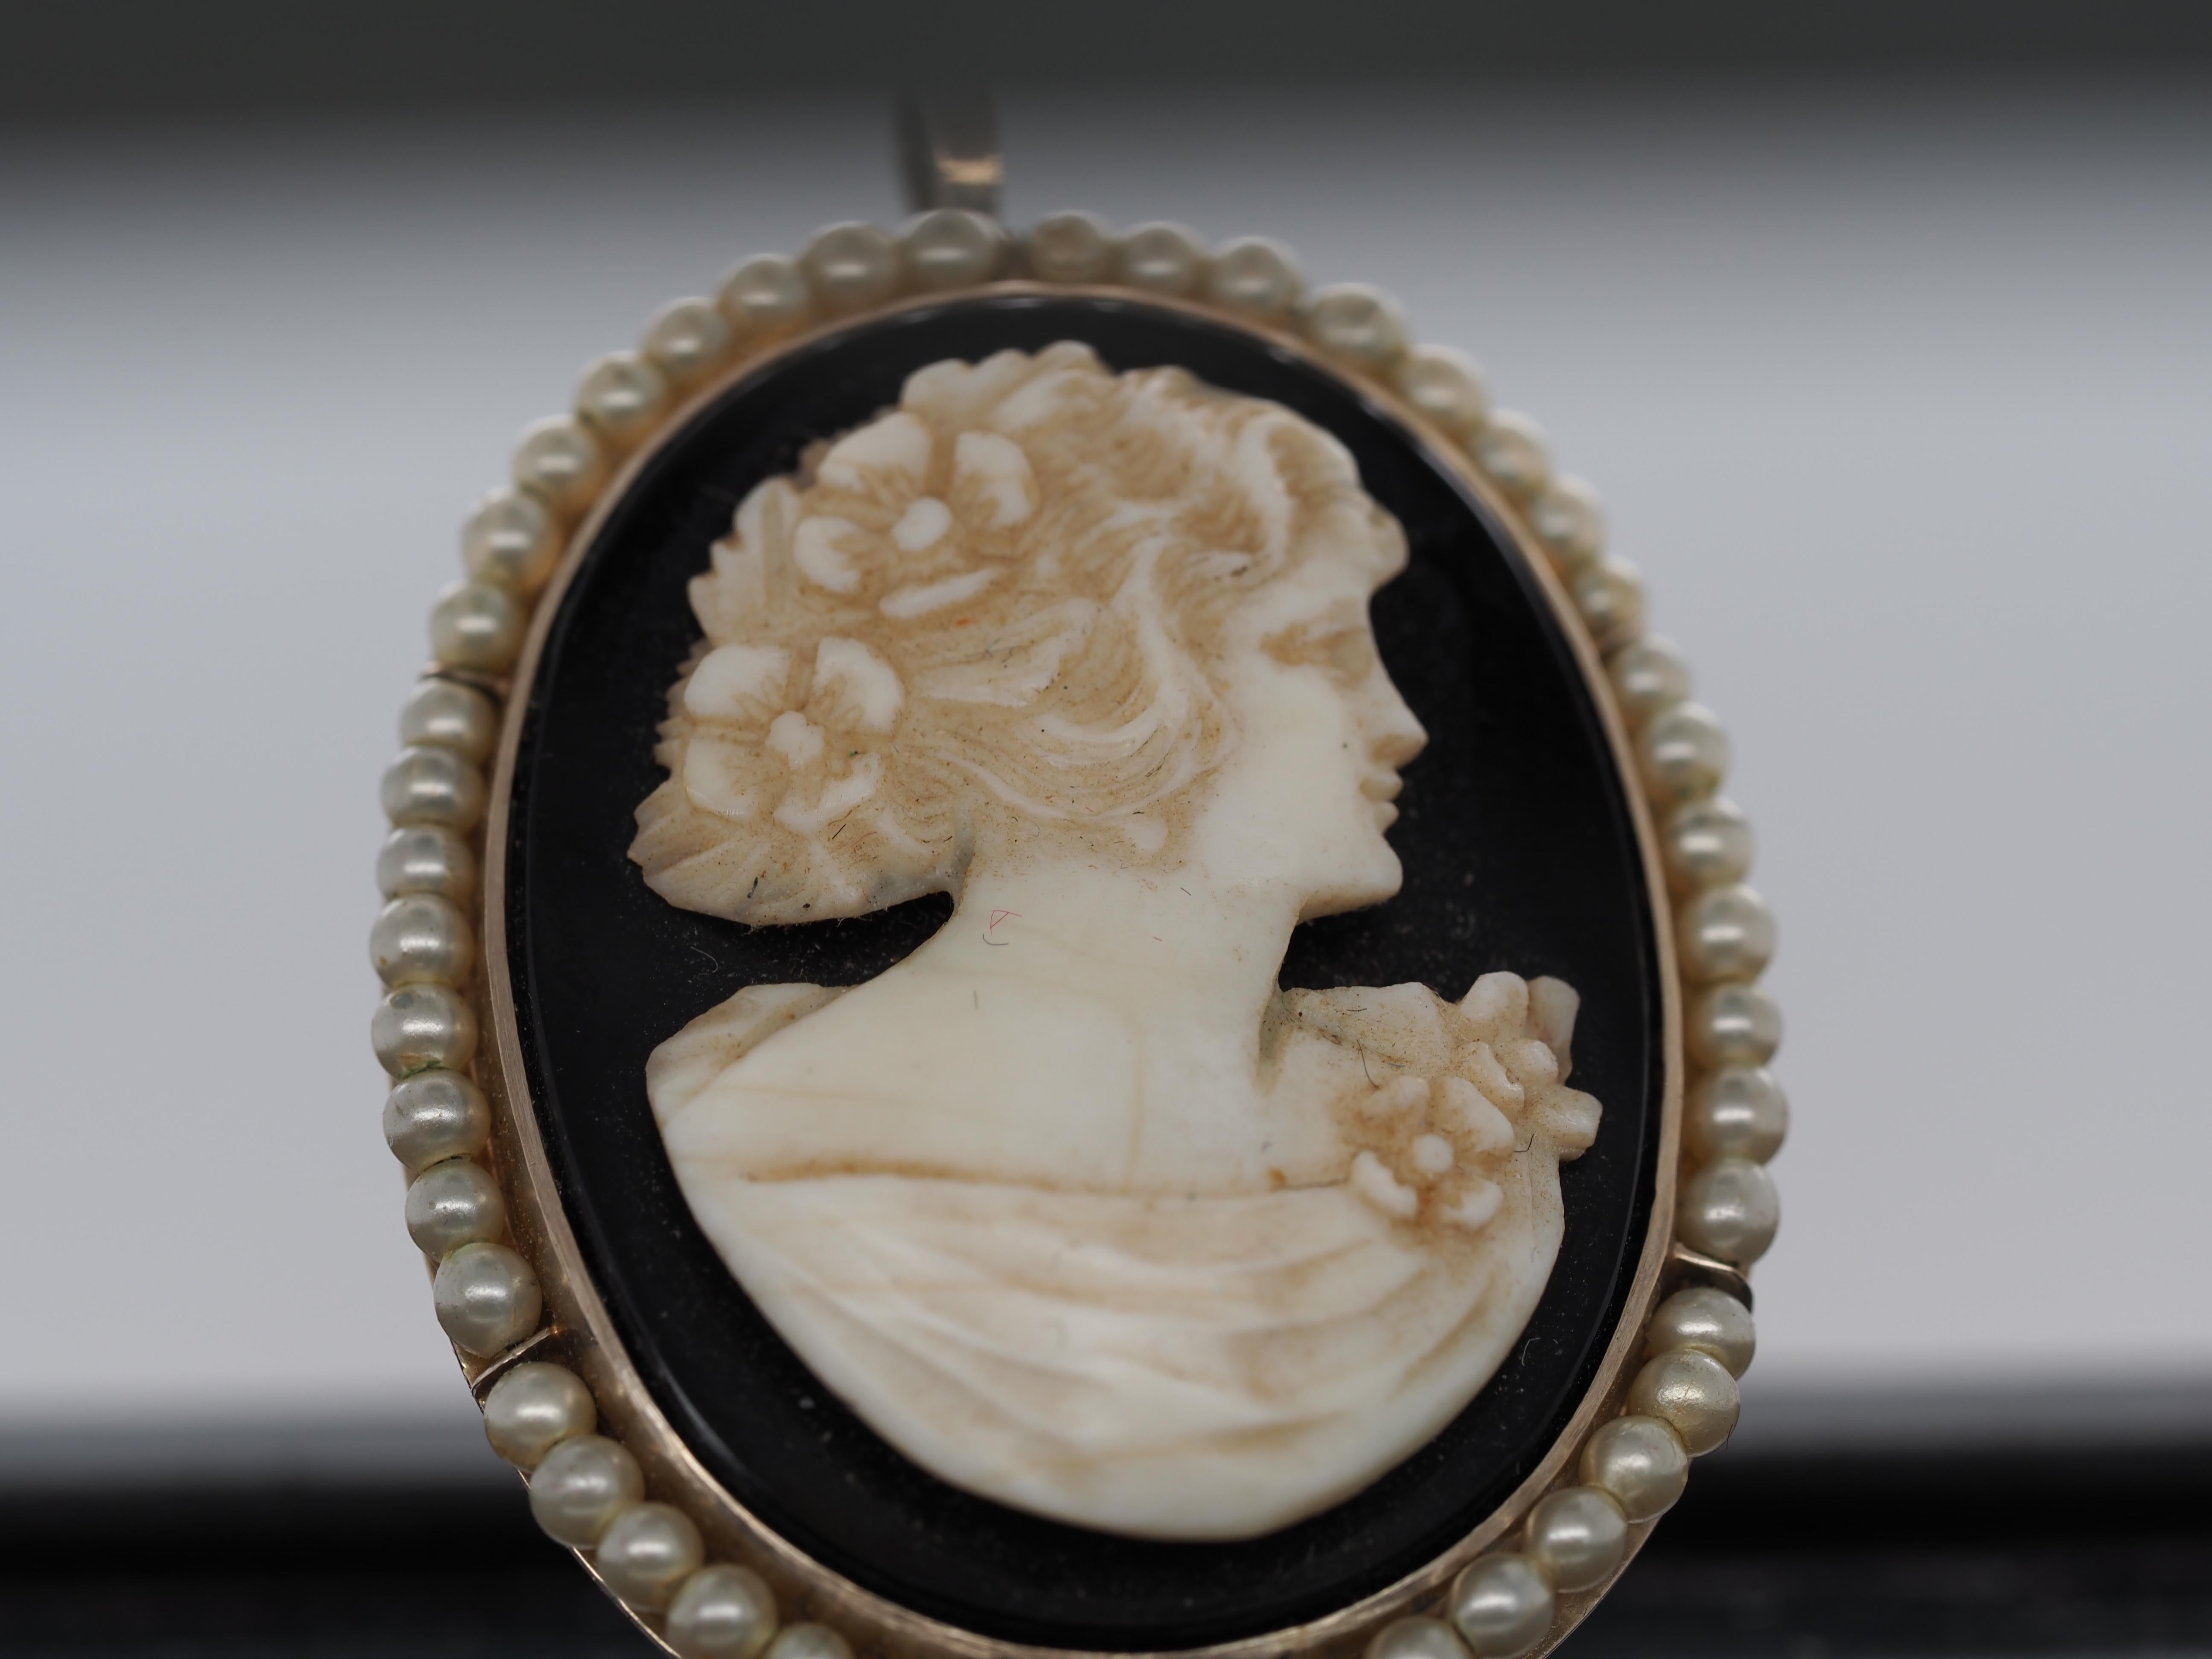 old cameo pendant